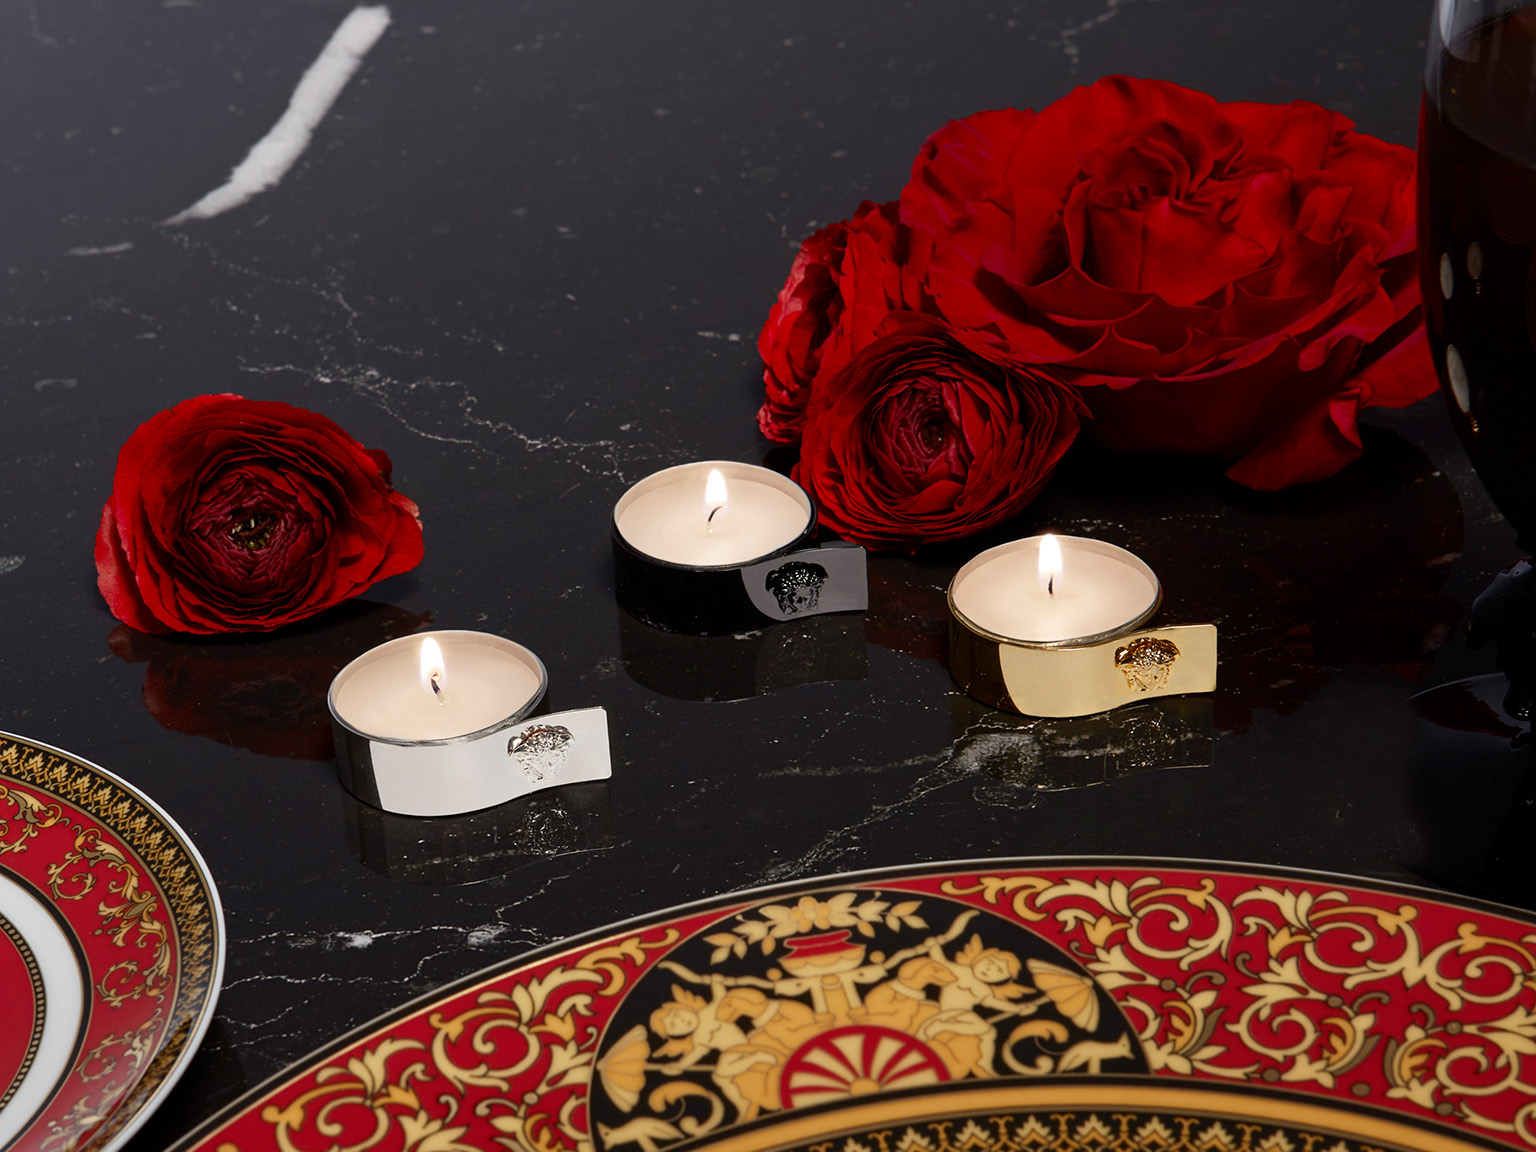 Versace Medusa Tea Lights & Napkin Rings on a black marble table with red roses in the background